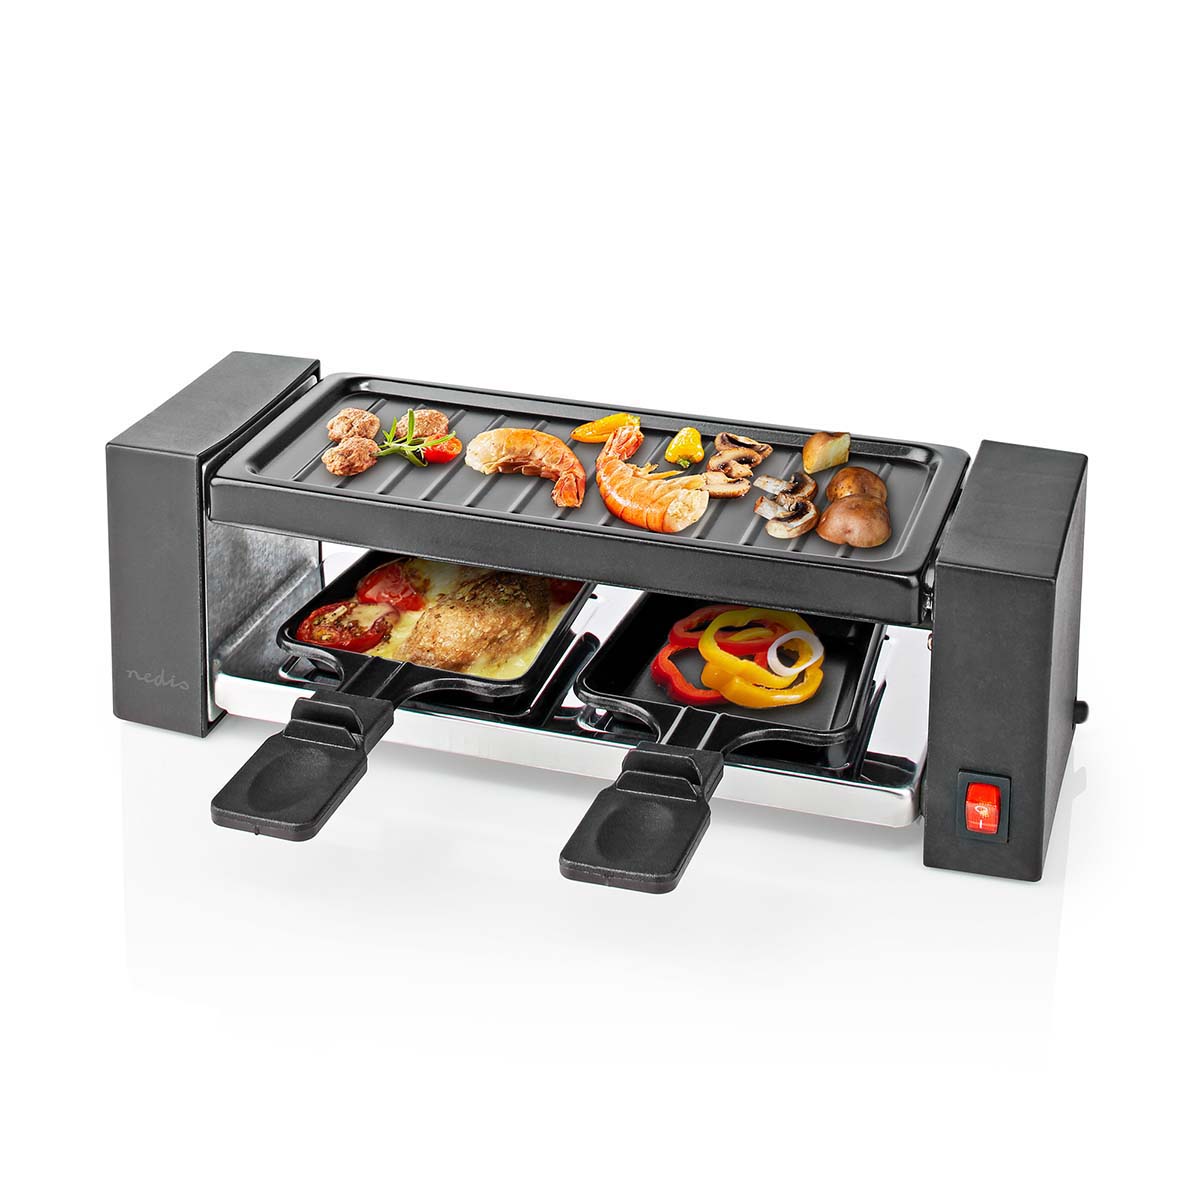 Gourmet / Raclette, Grill, 2 Persons, Spatula, Non stick coating